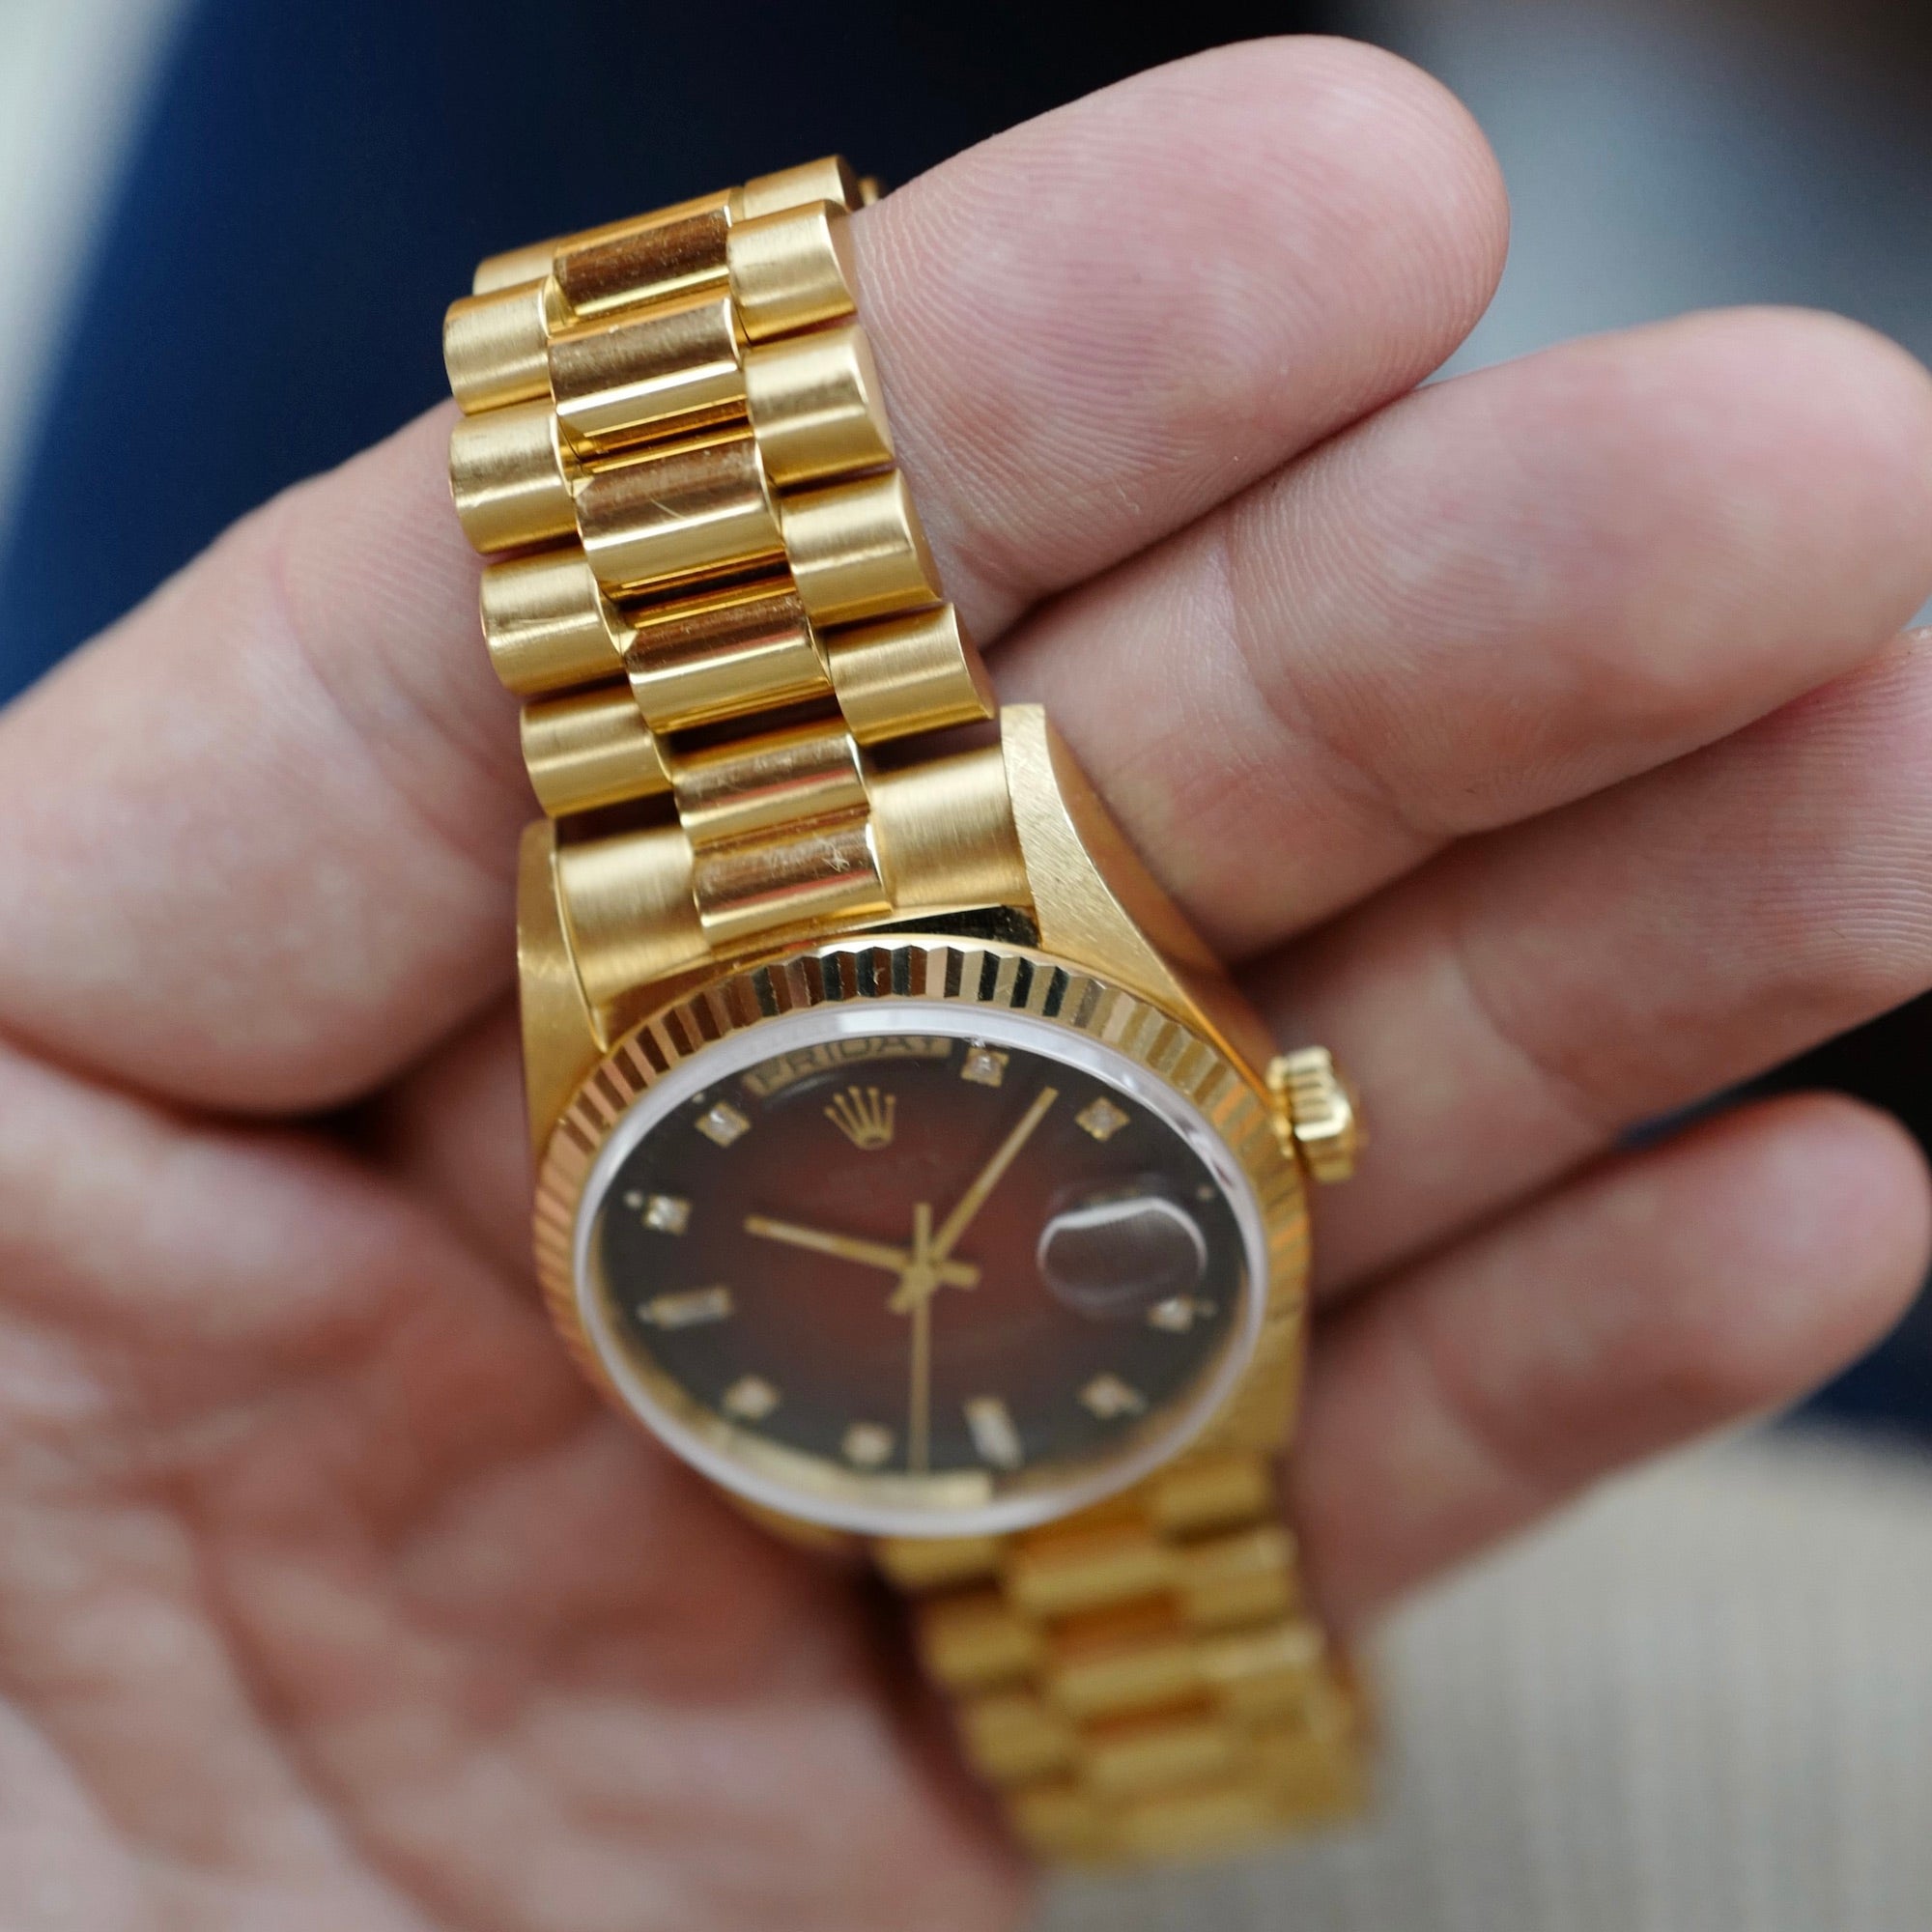 Rolex Yellow Gold Day Date Ref. 18238 with Red Vignette Dial